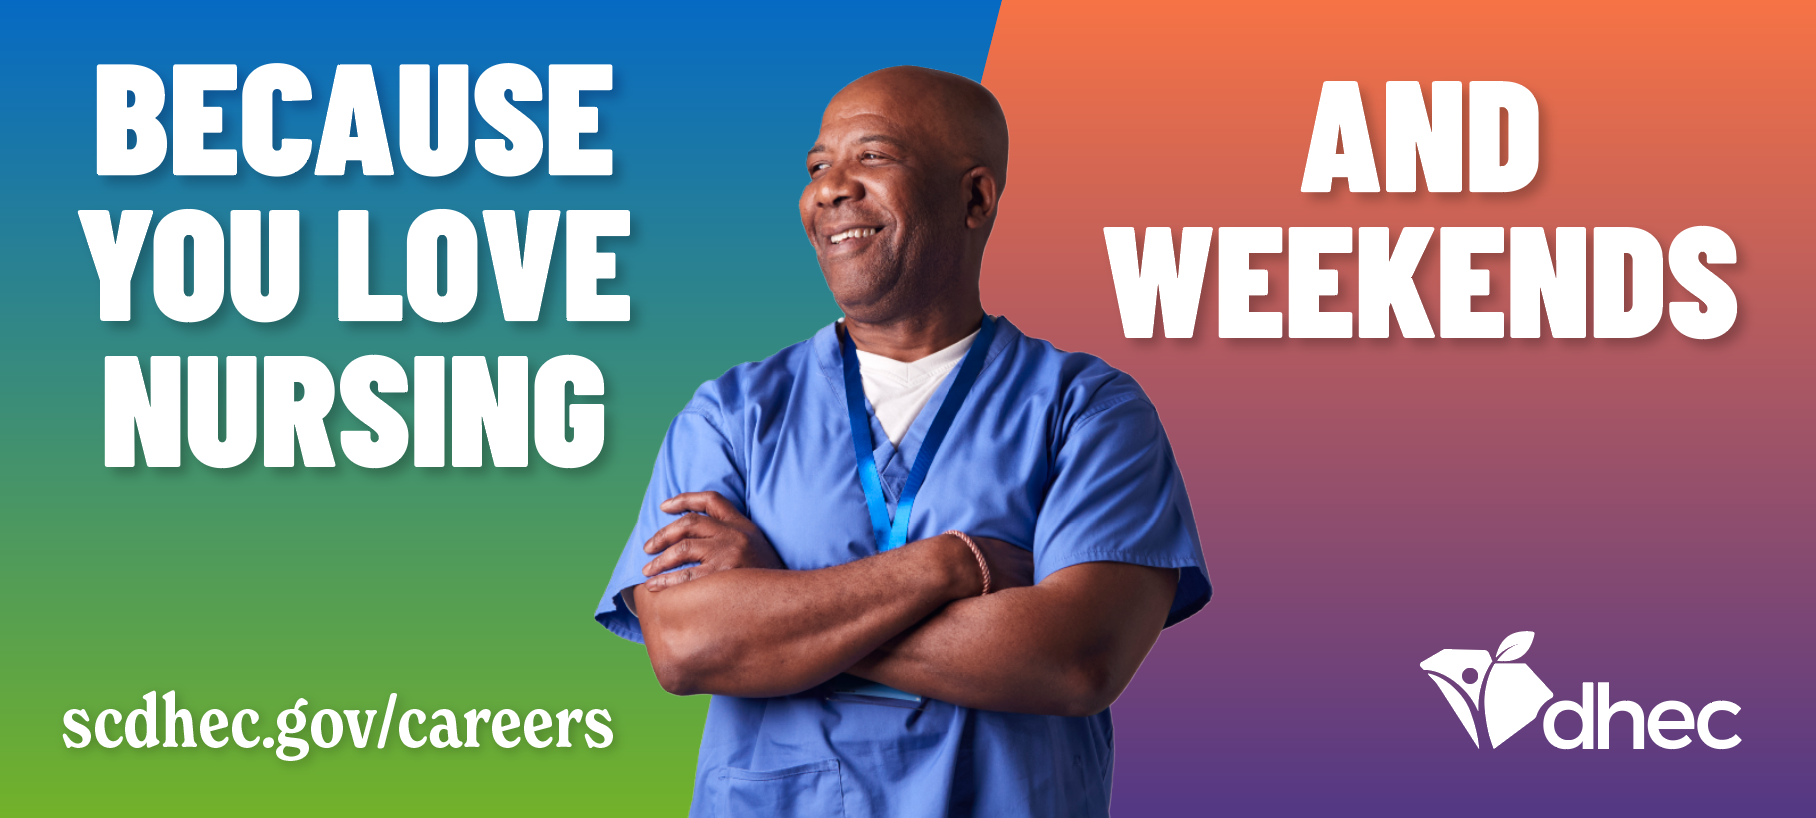 Male nurse in front of rainbow backgruond reading 'Because you love nursing and weekends'